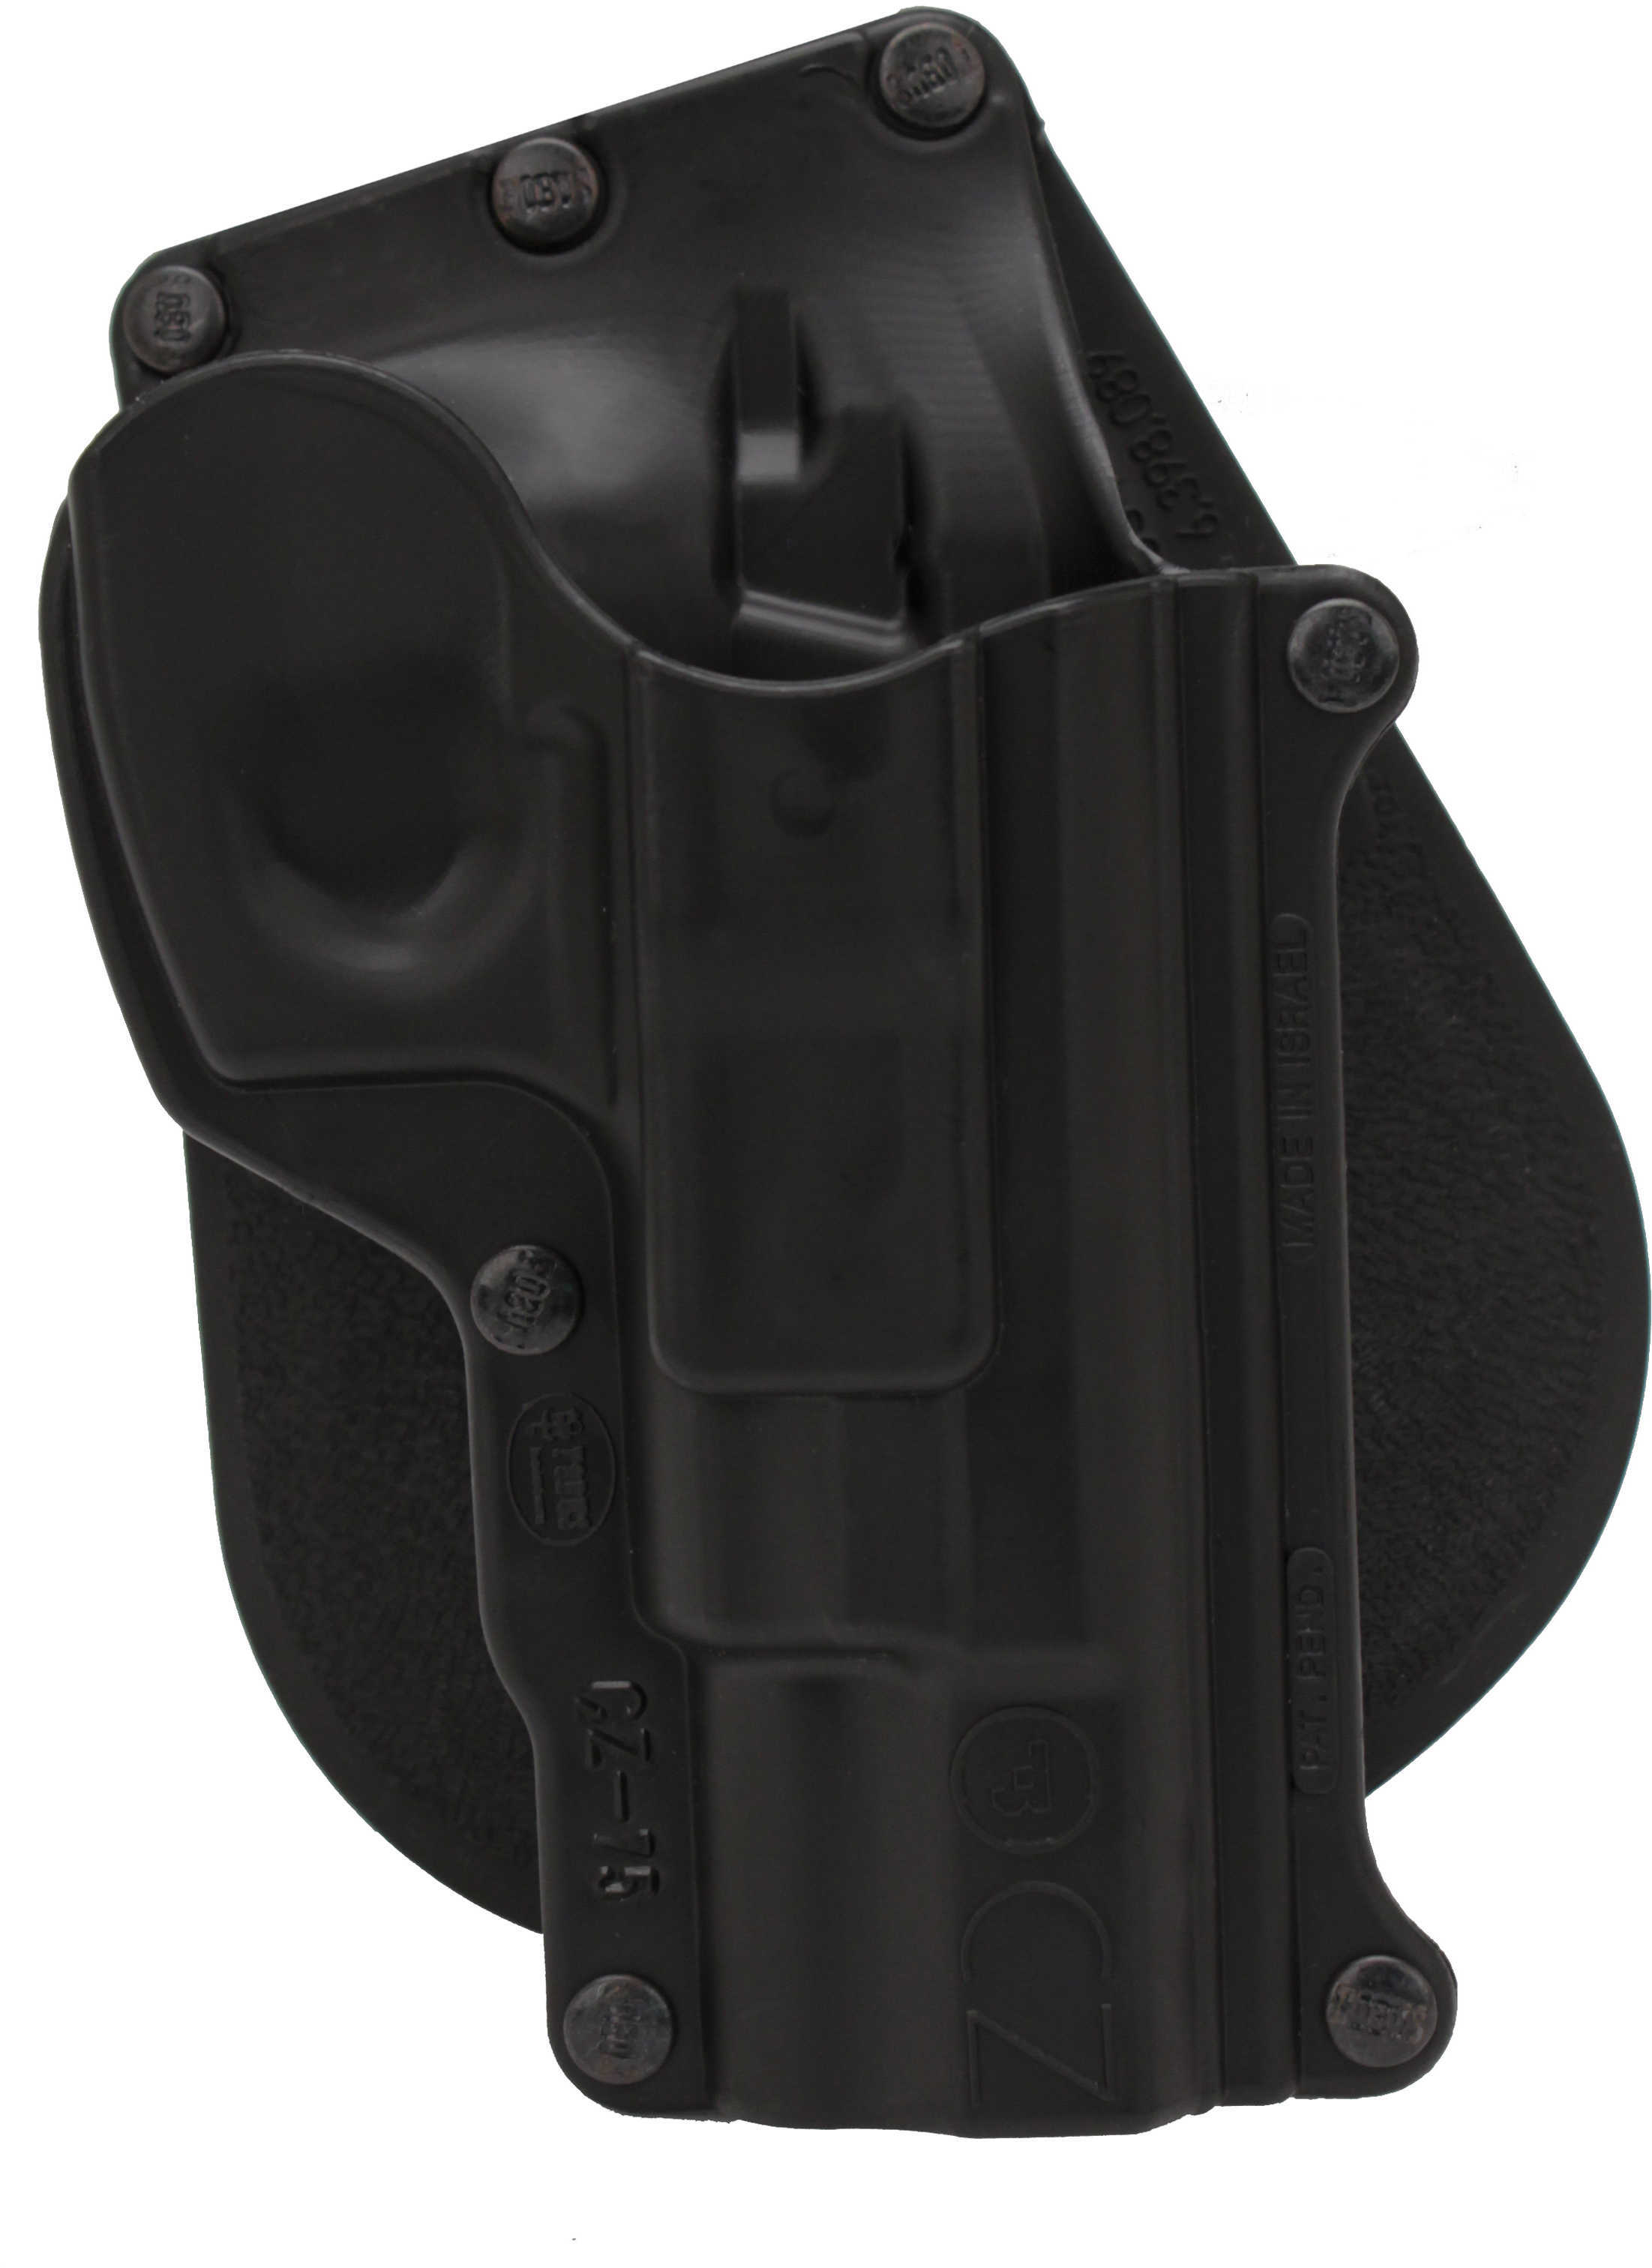 Fobus Paddle Holster Fits CZ 75/75BD/85/Cadet 22/75D Compact 9mm EAA Clones Right Hand Kydex Black CZ75